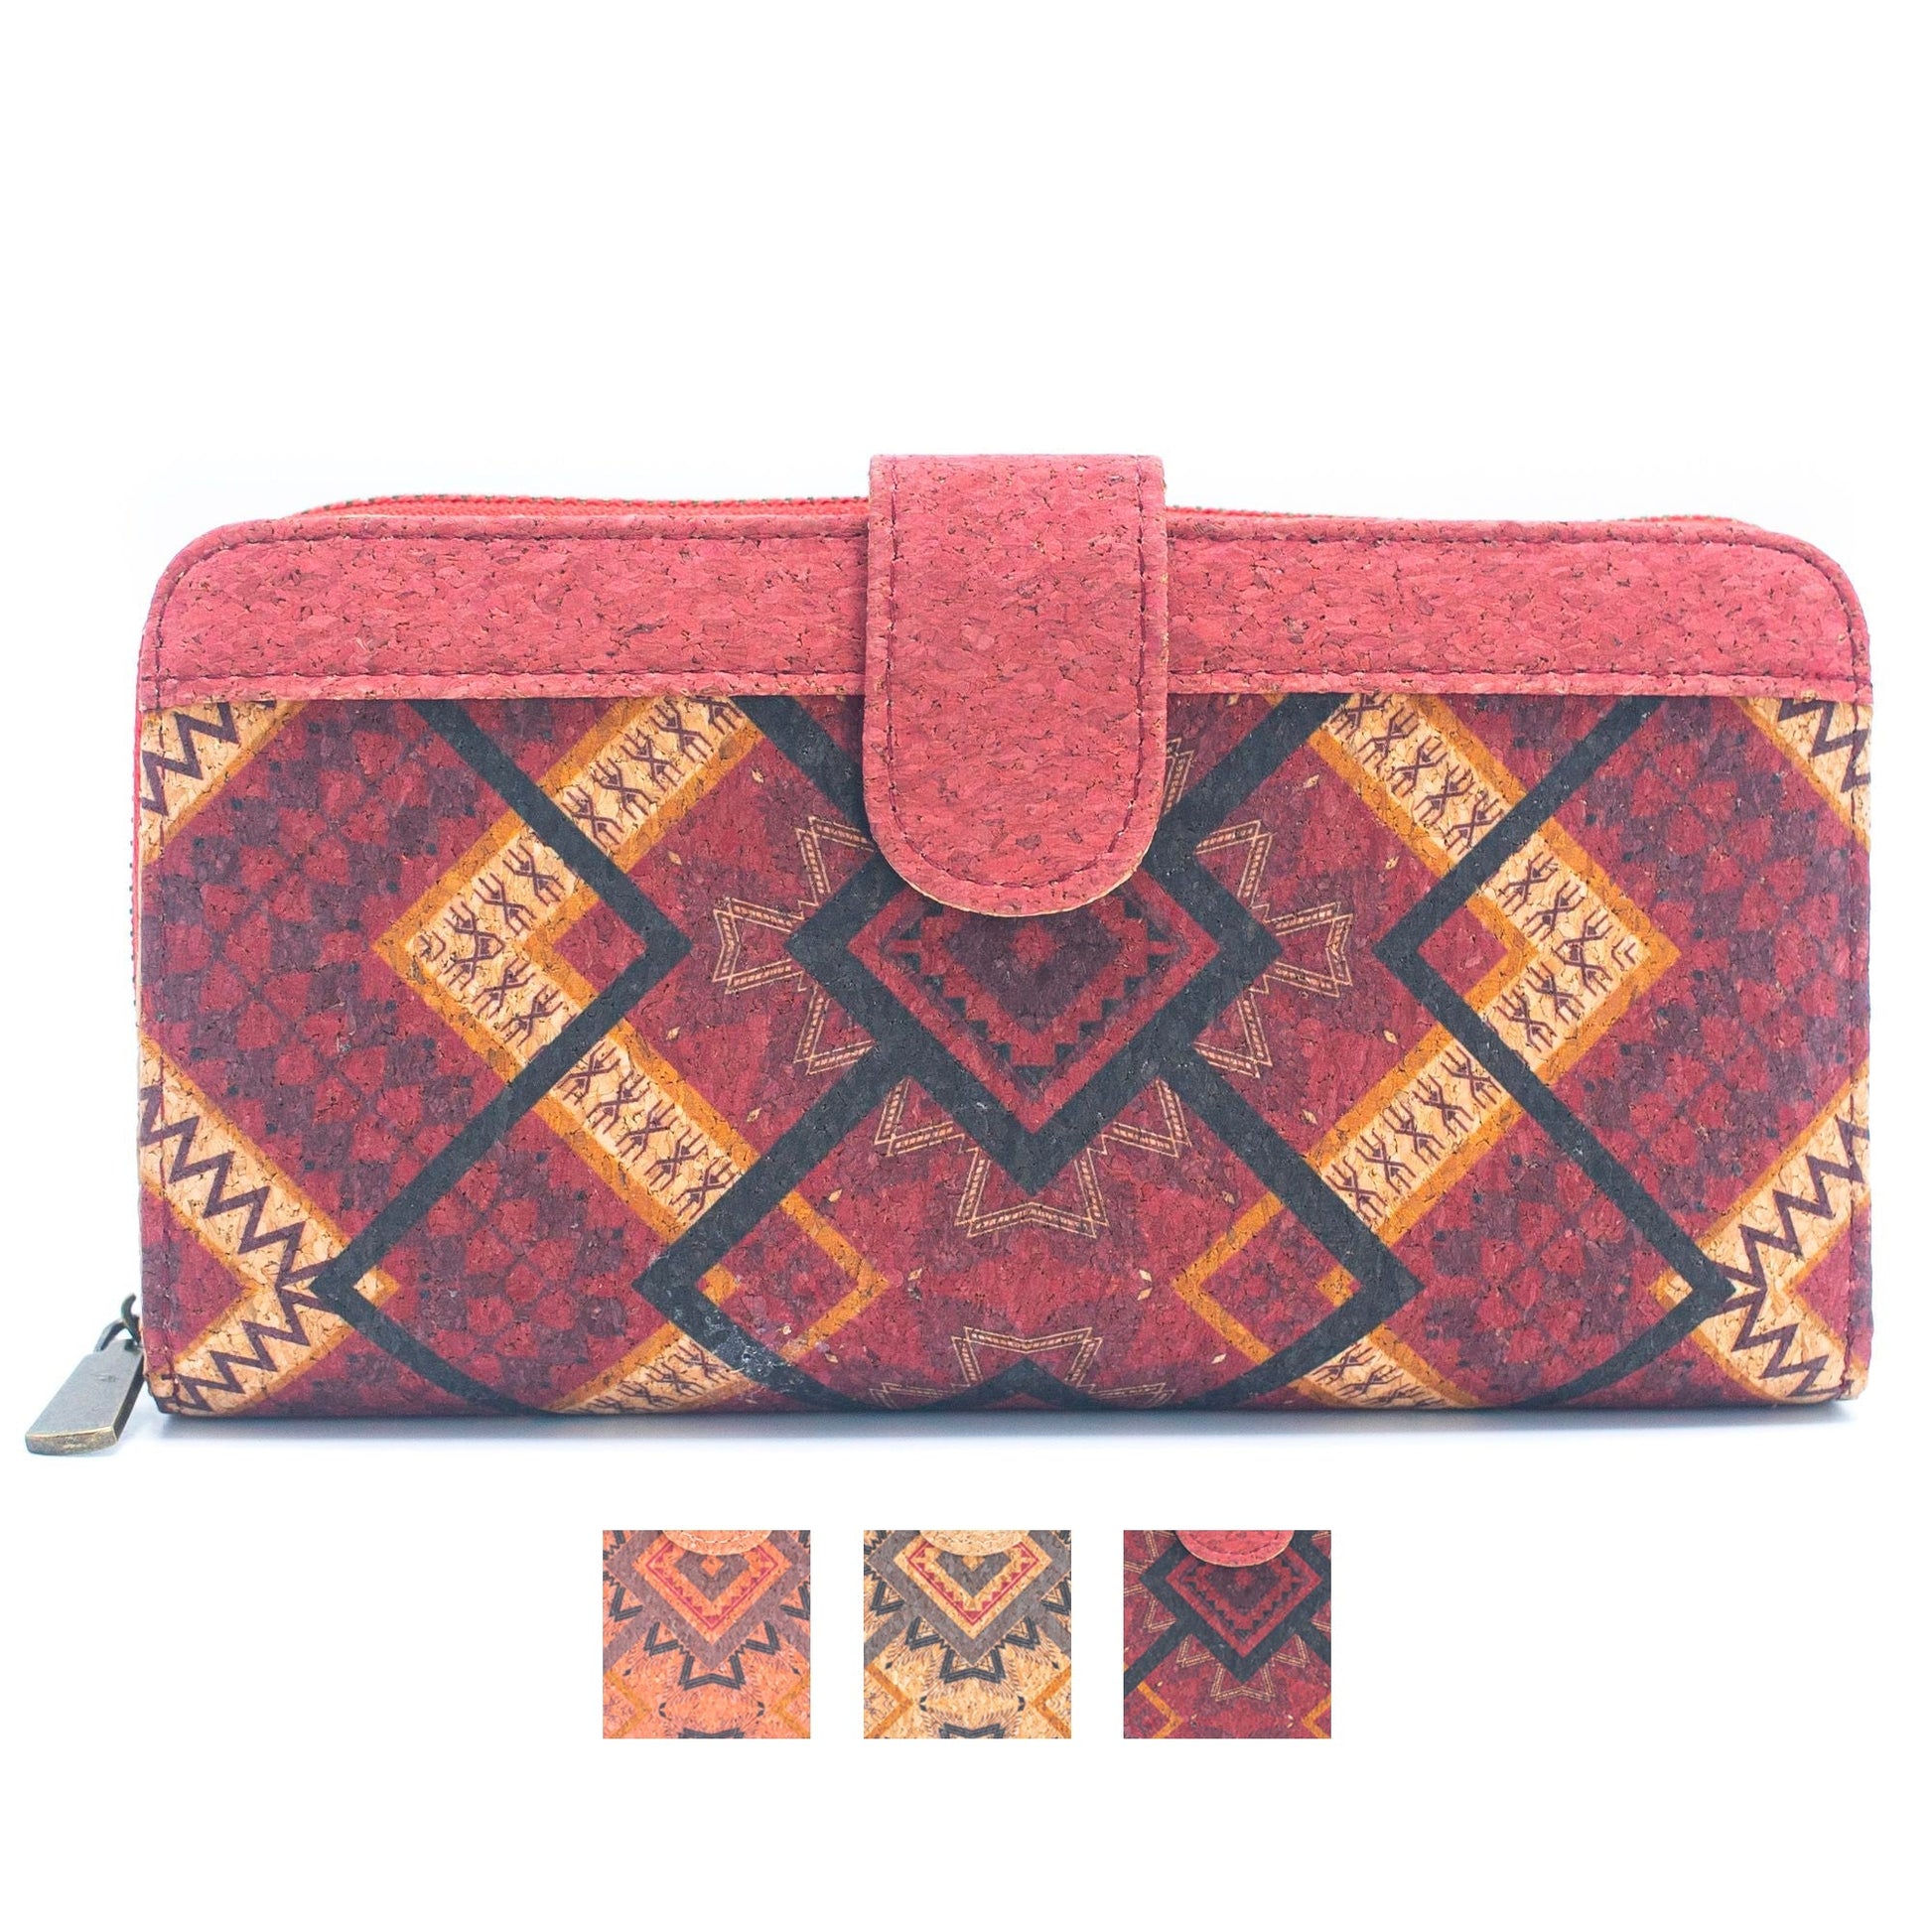 Colorful Patterns Vegan Cork Folding Wallet | THE CORK COLLECTION